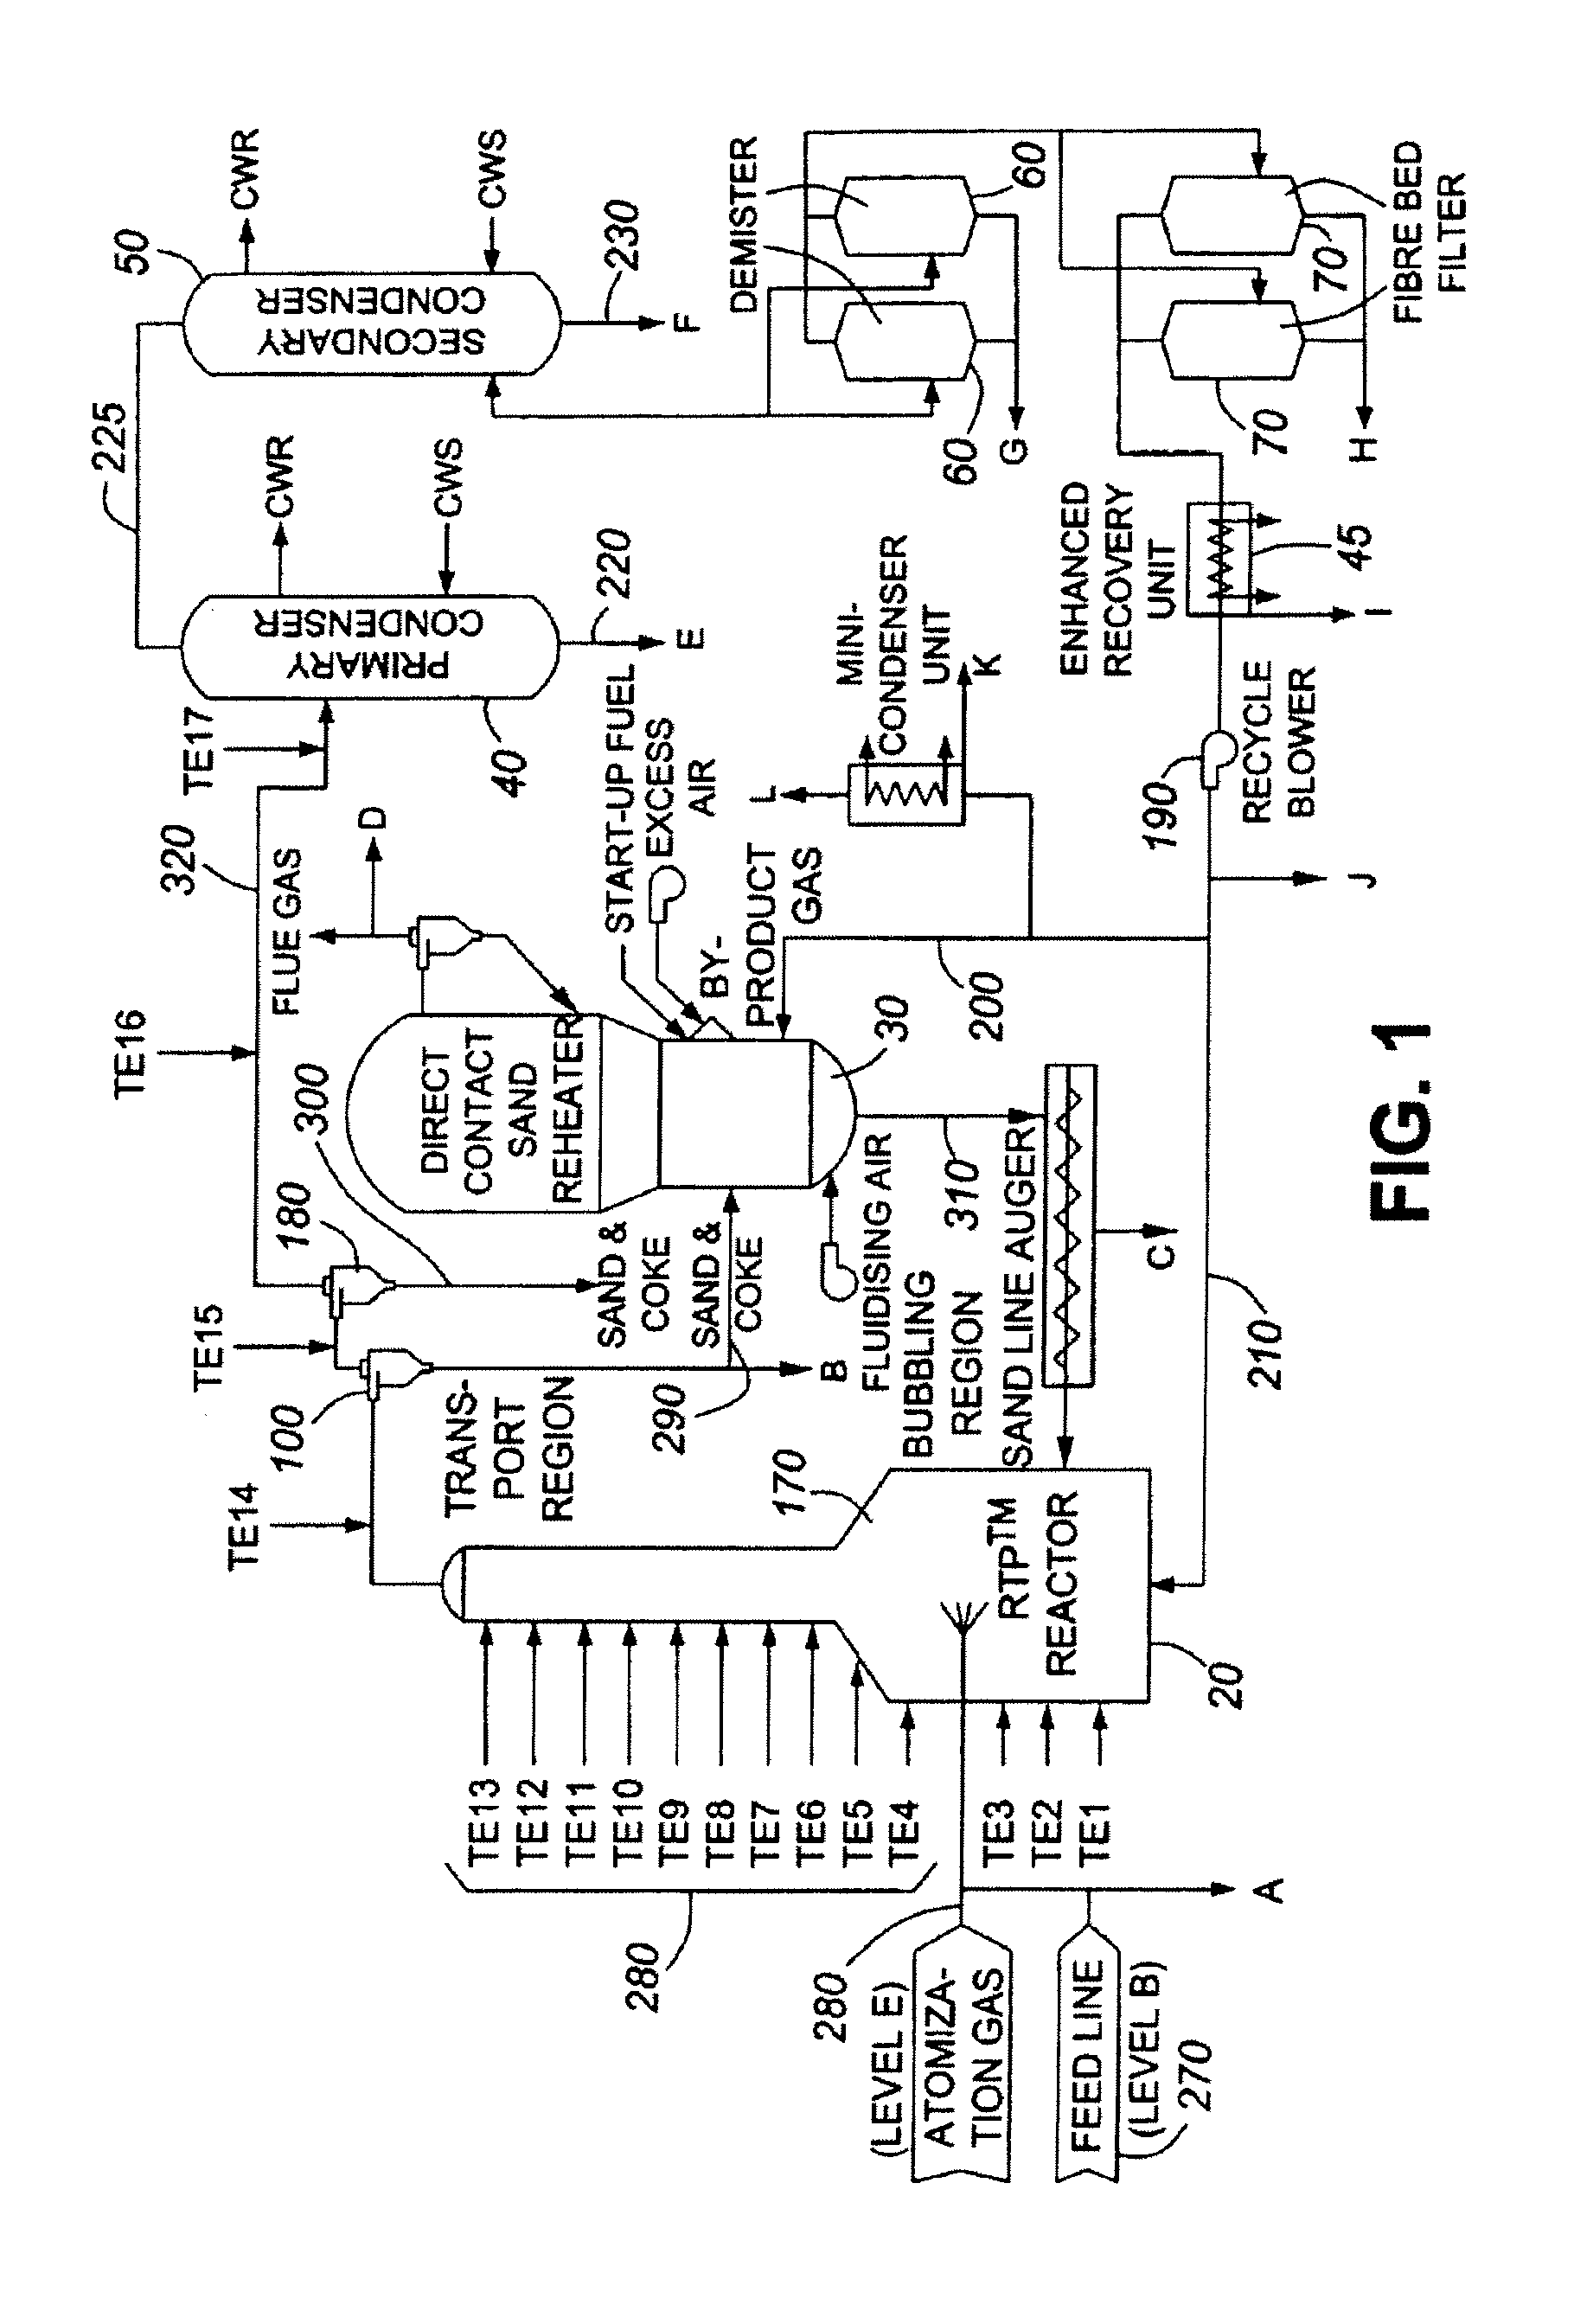 Methods and Systems for Producing Reduced Resid and Bottomless Products from Heavy Hydrocarbon Feedstocks